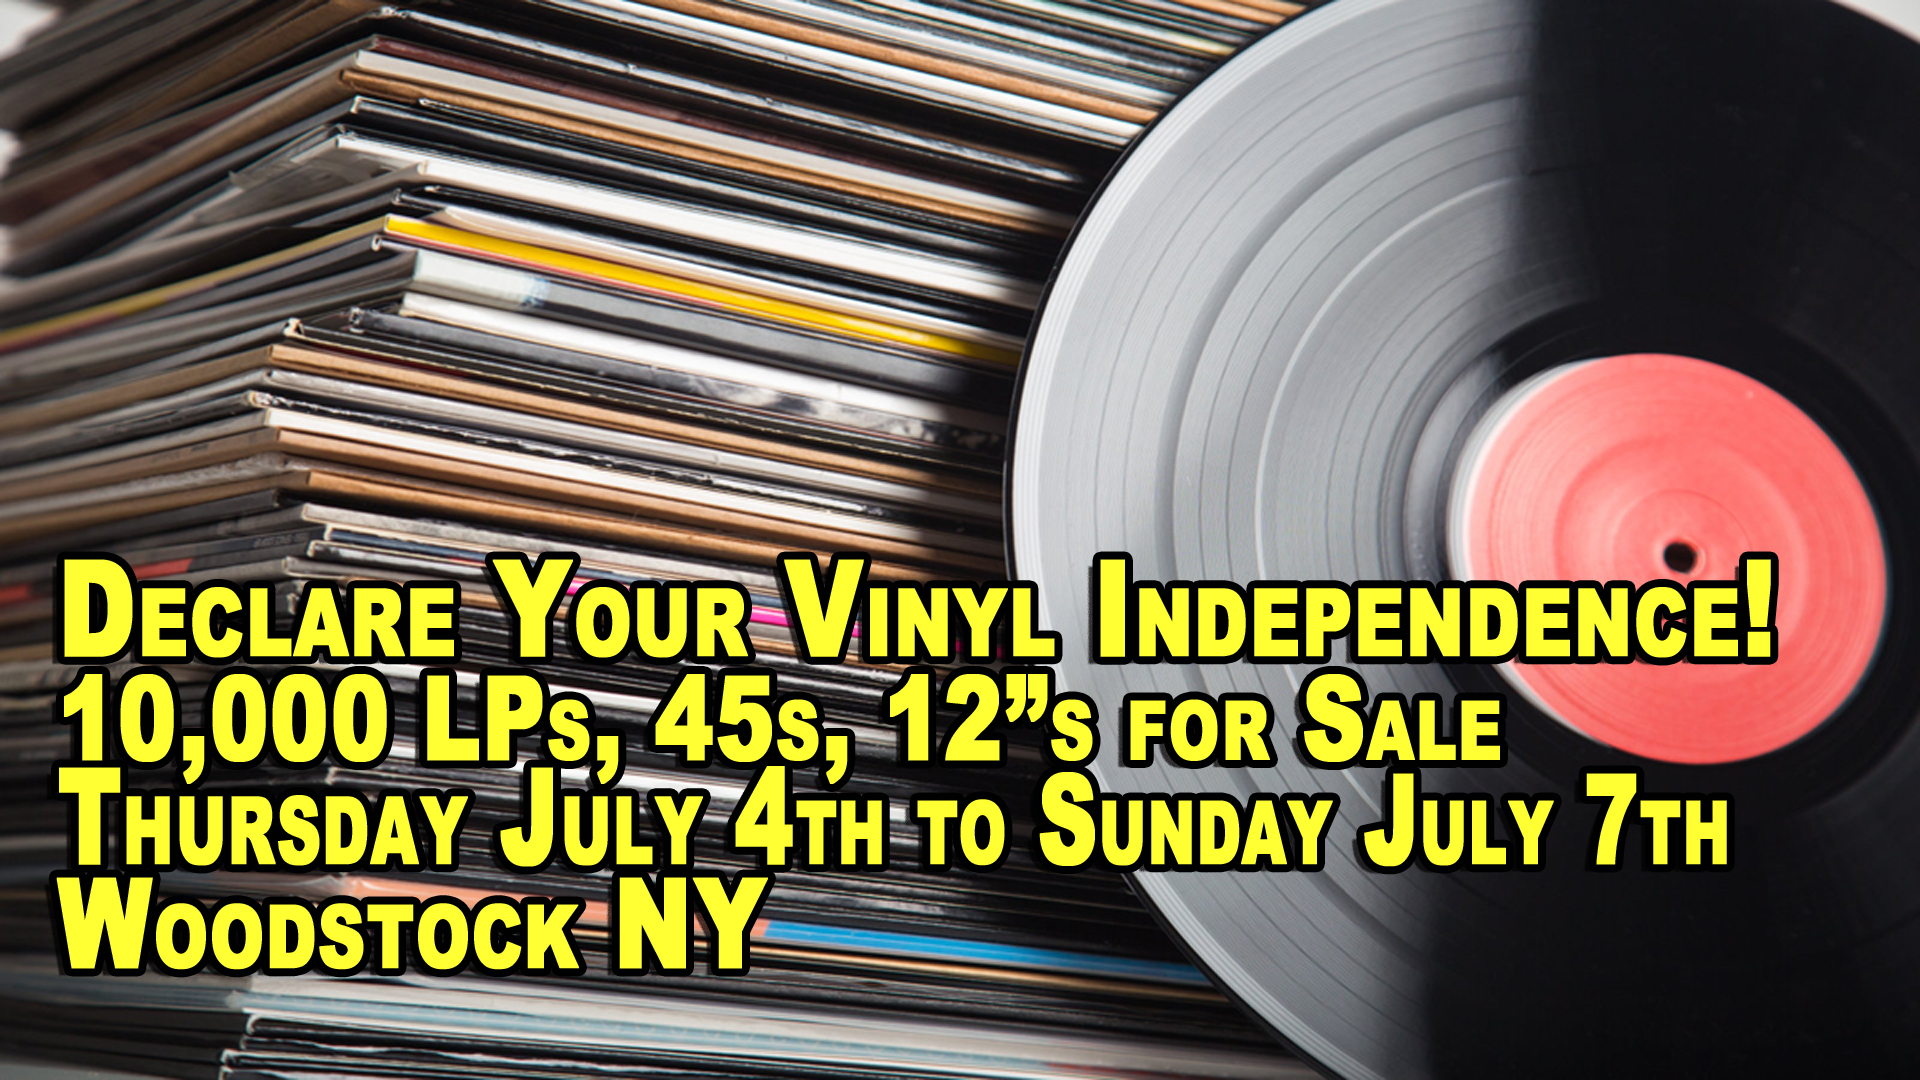 Woodstock, NY – Declare Your Vinyl Independence – Thursday July  4th to Sunday July 7th 2019